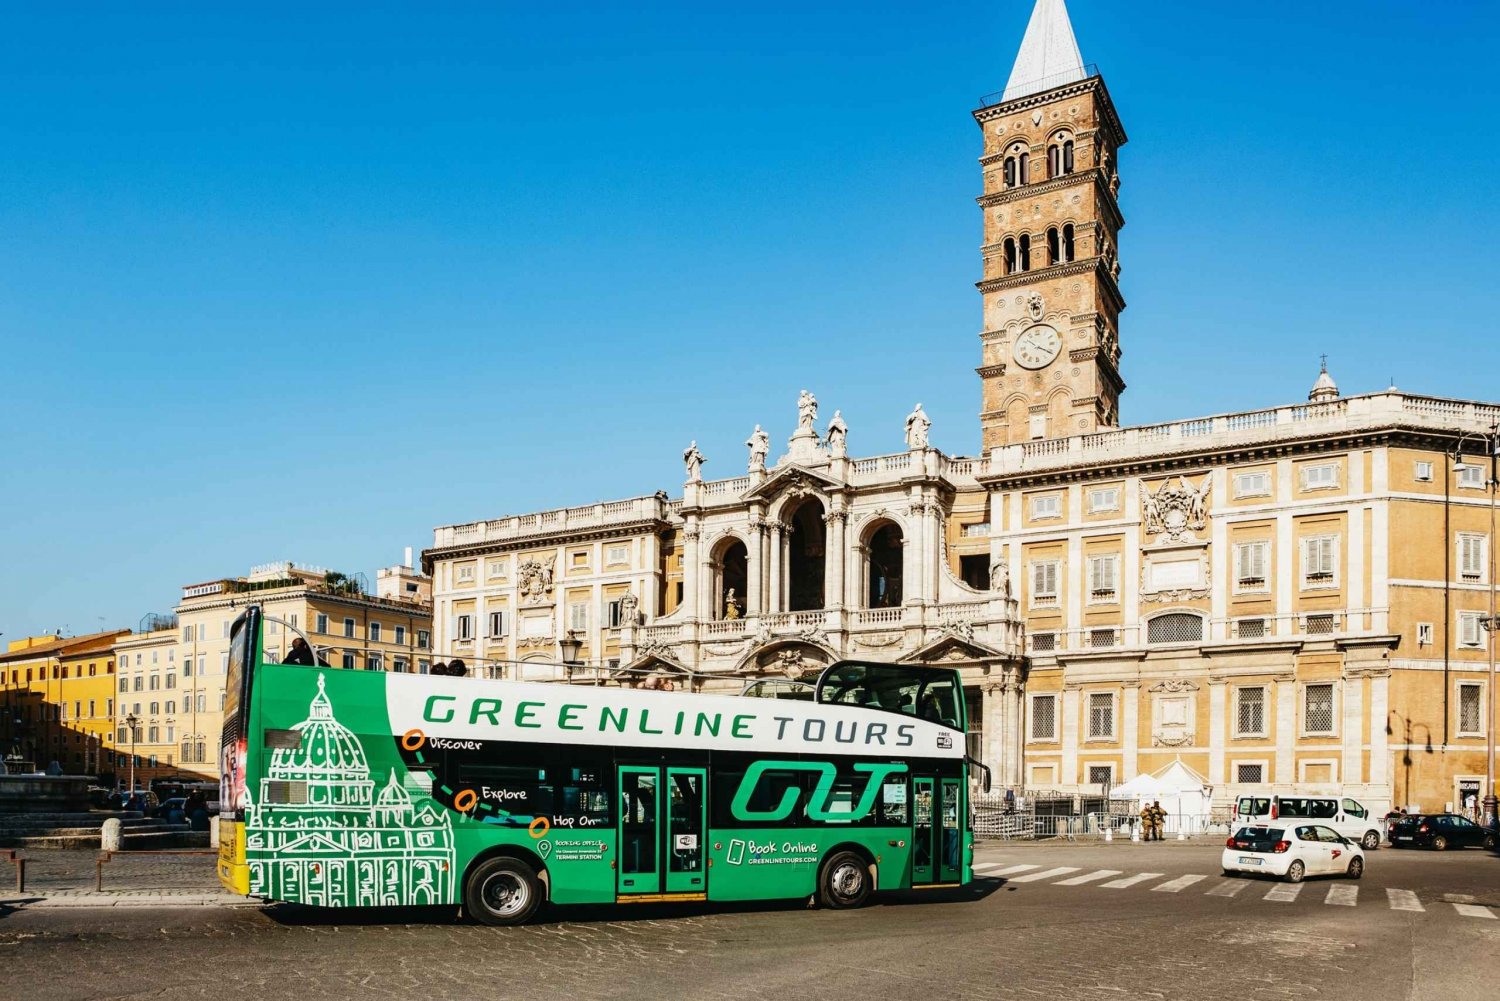 Rome: Hop-On Hop-Off Panoramic Open Bus Ticket